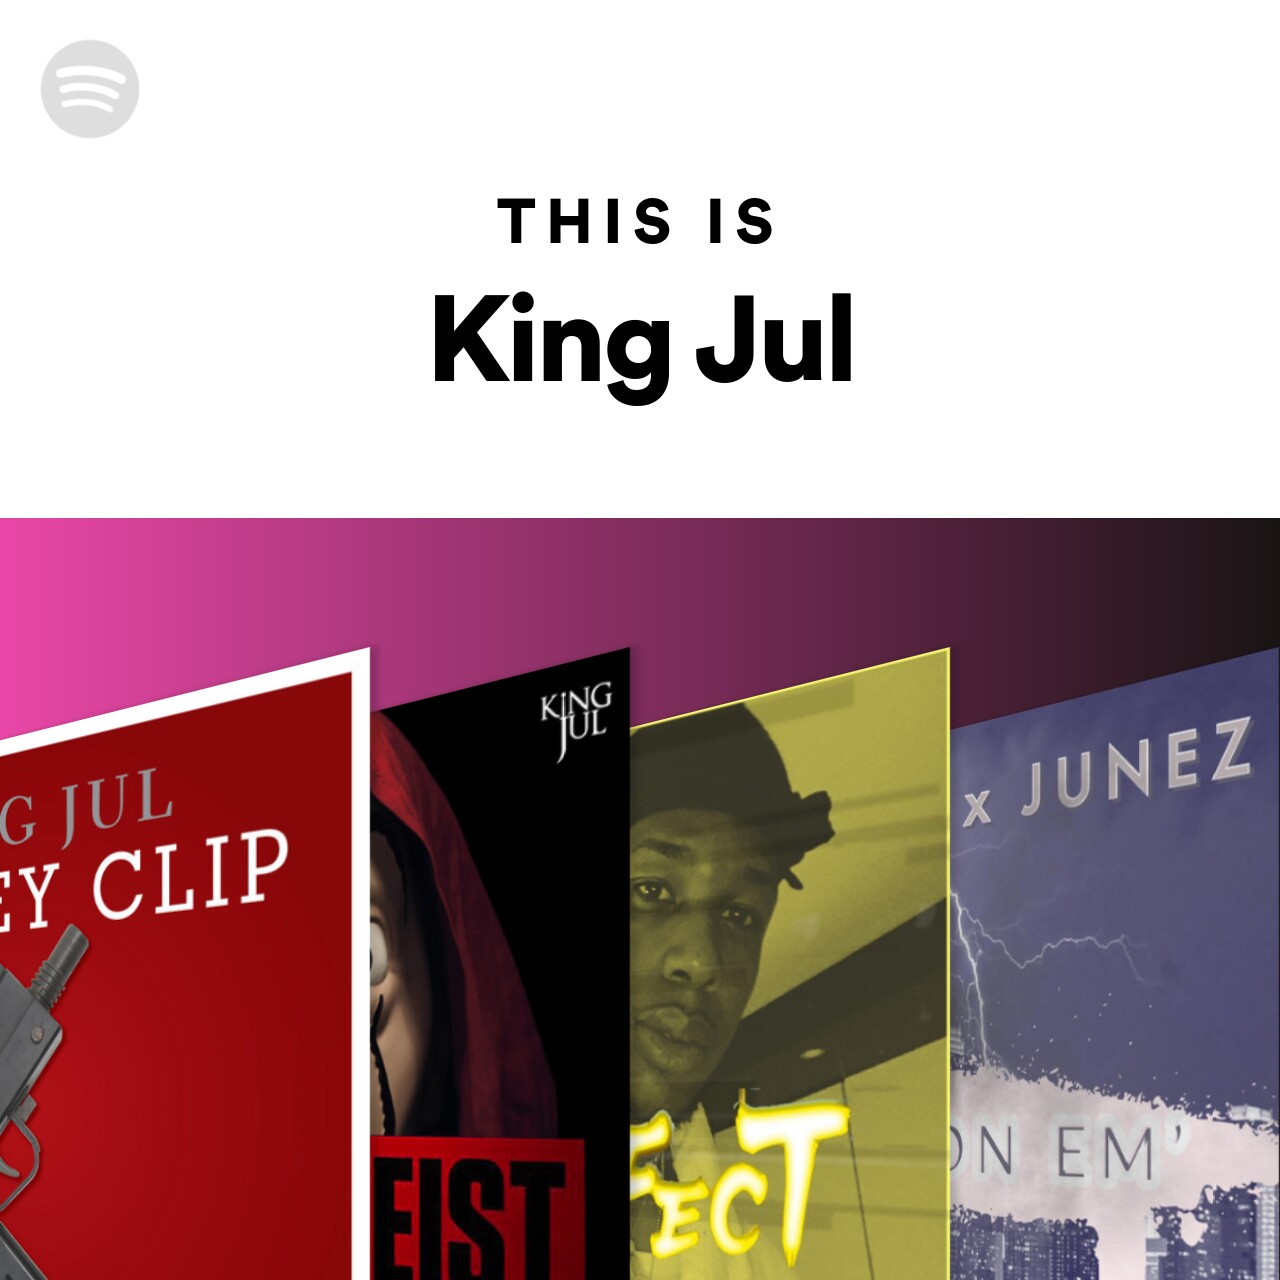 This Is King Jul